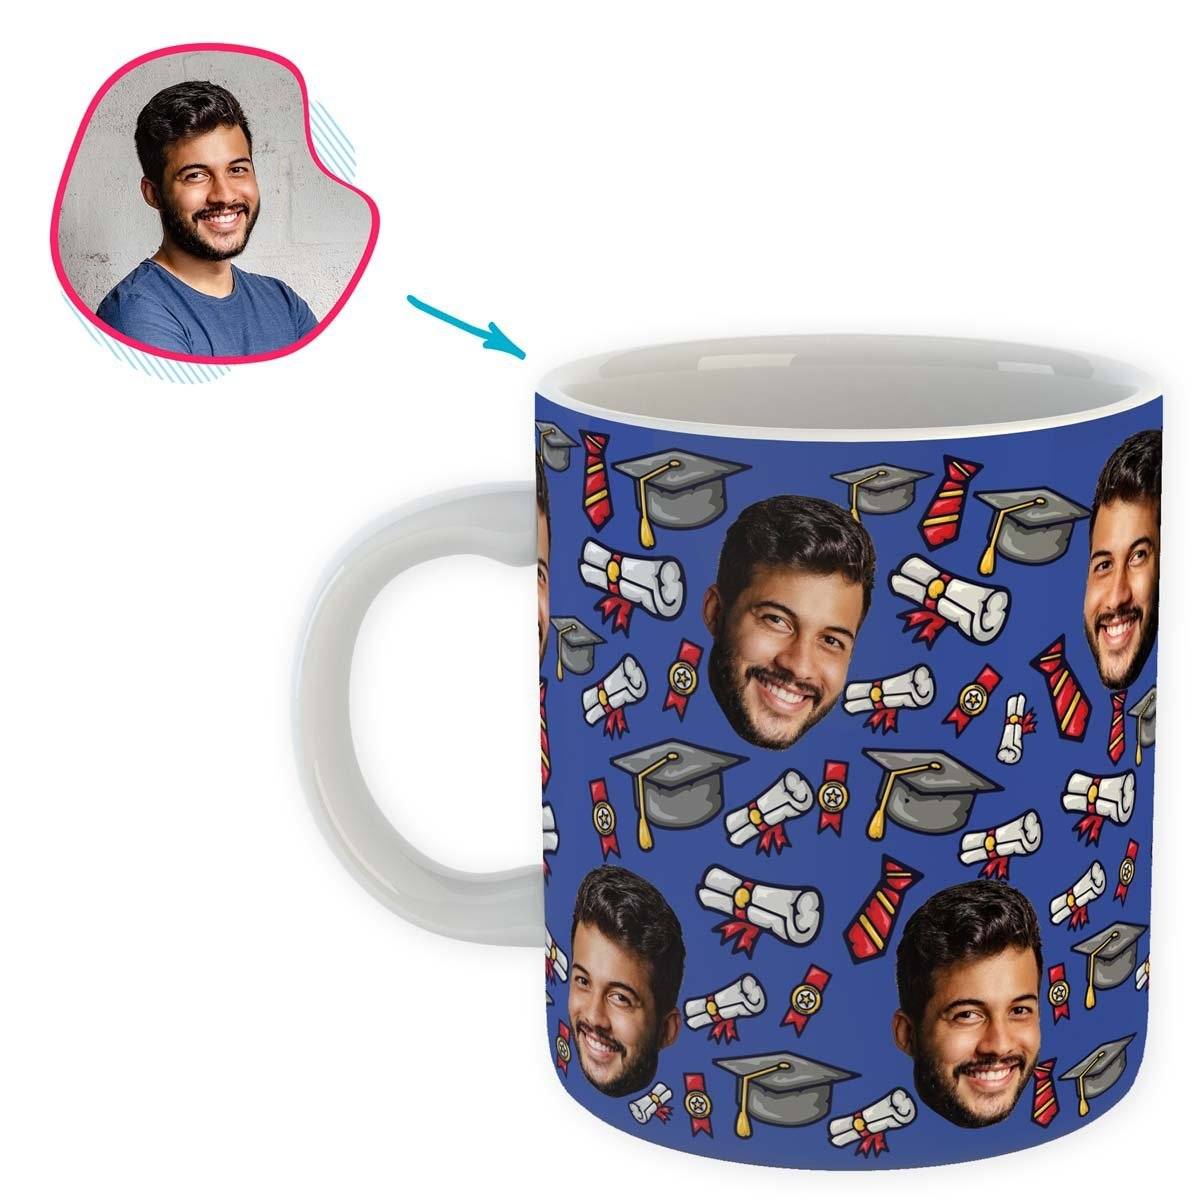 Darkblue Students & Graduates personalized mug with photo of face printed on it